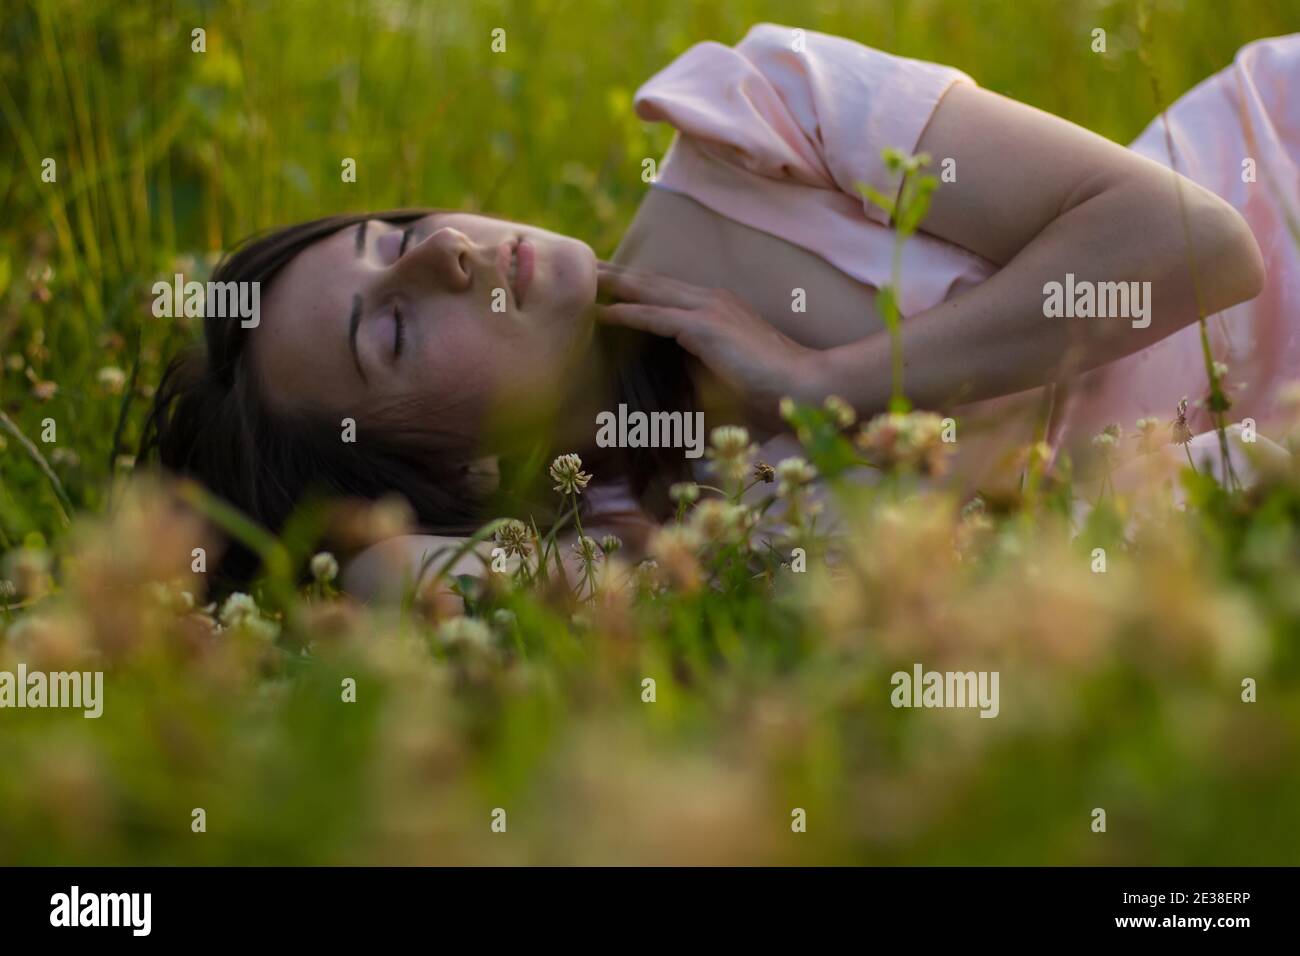 Photo of beautiful sleeping woman in the fild with wildflowers Stock Photo